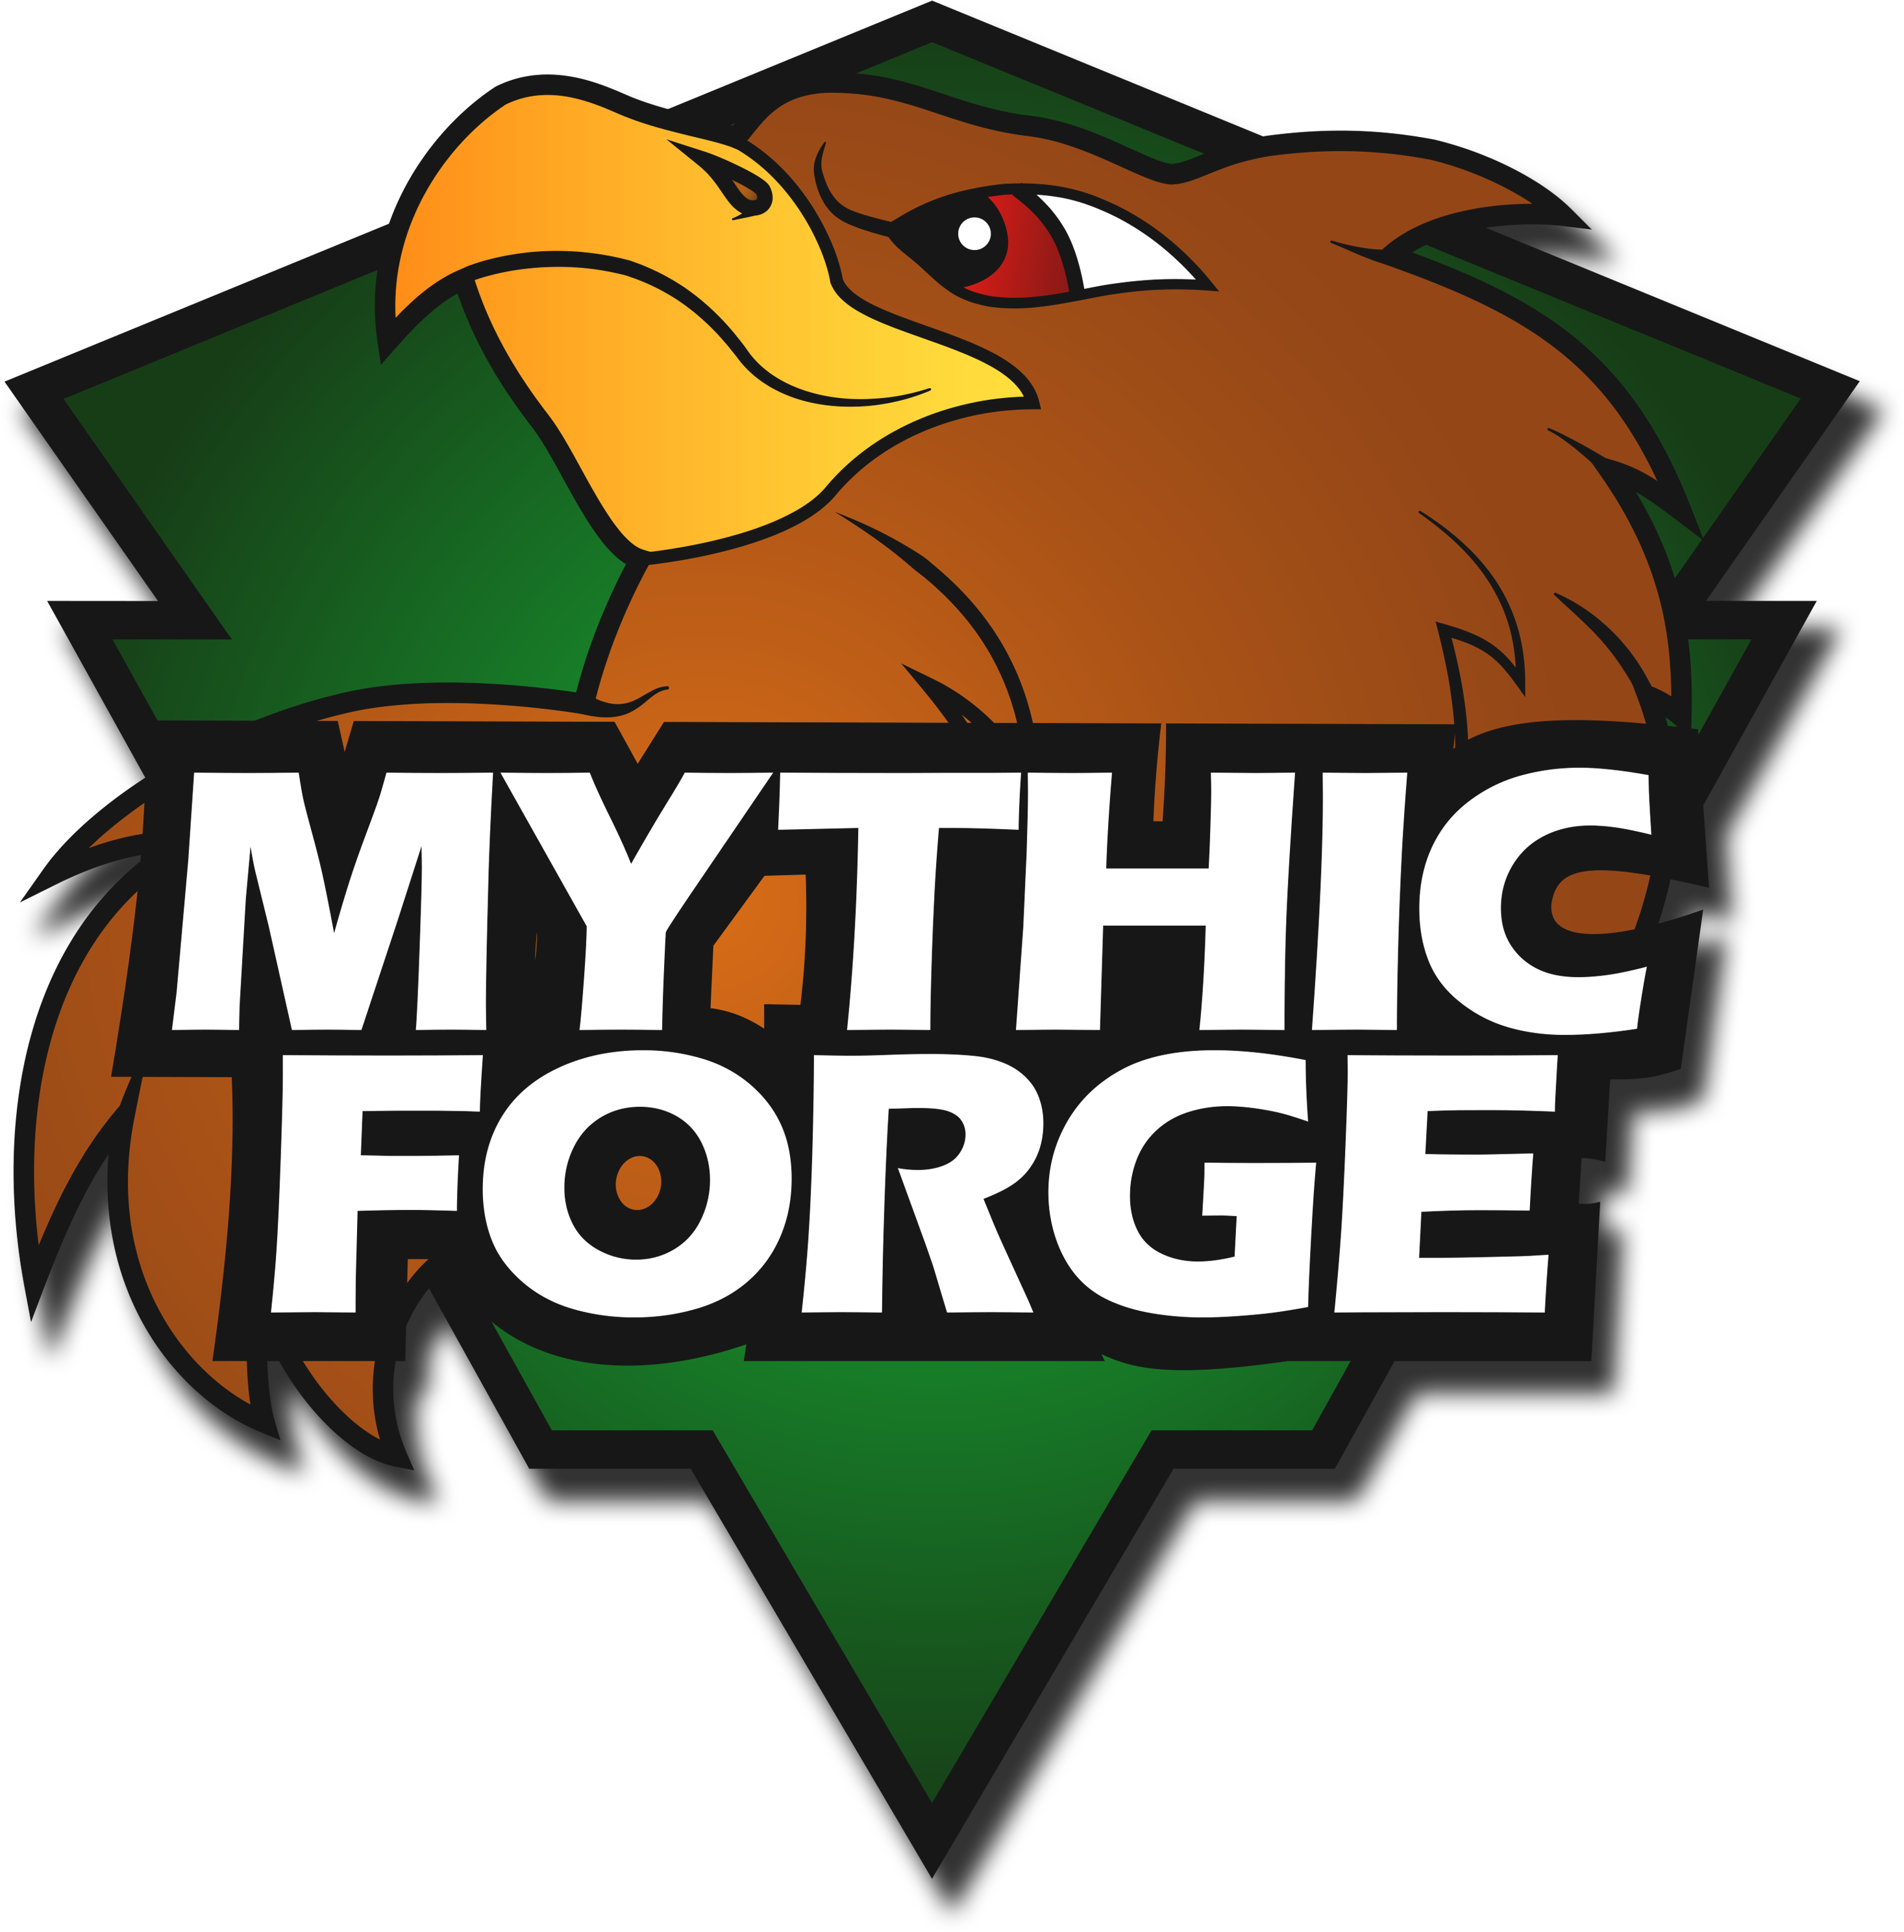 Mythic Forge - Graphic Design (3180x3058)